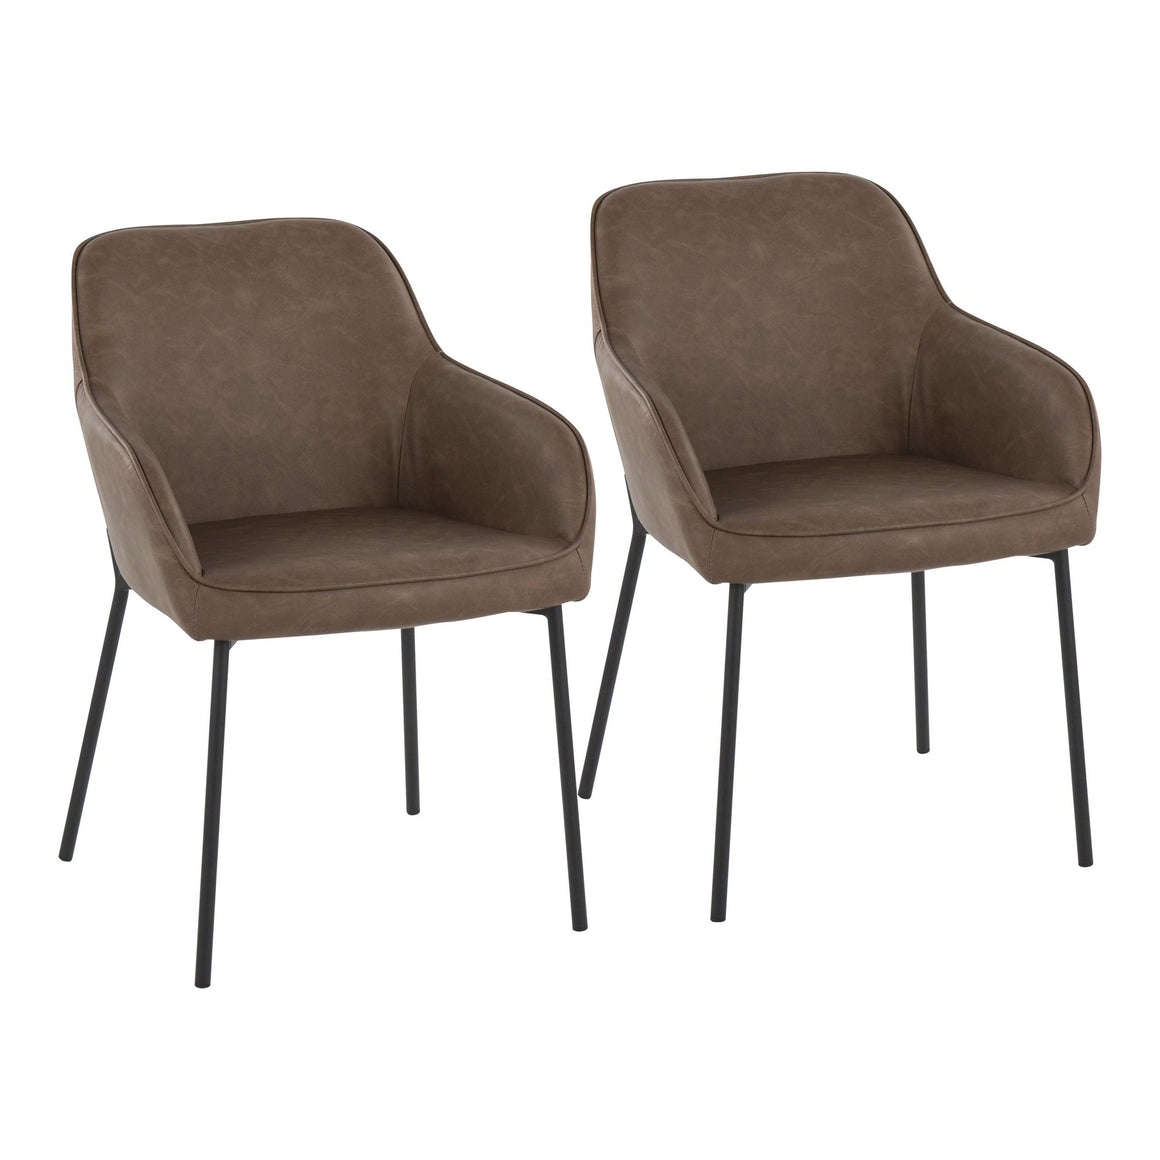 Daniella Contemporary Dining Chair in Black Steel and Espresso Faux Leather by LumiSource - Set of 2